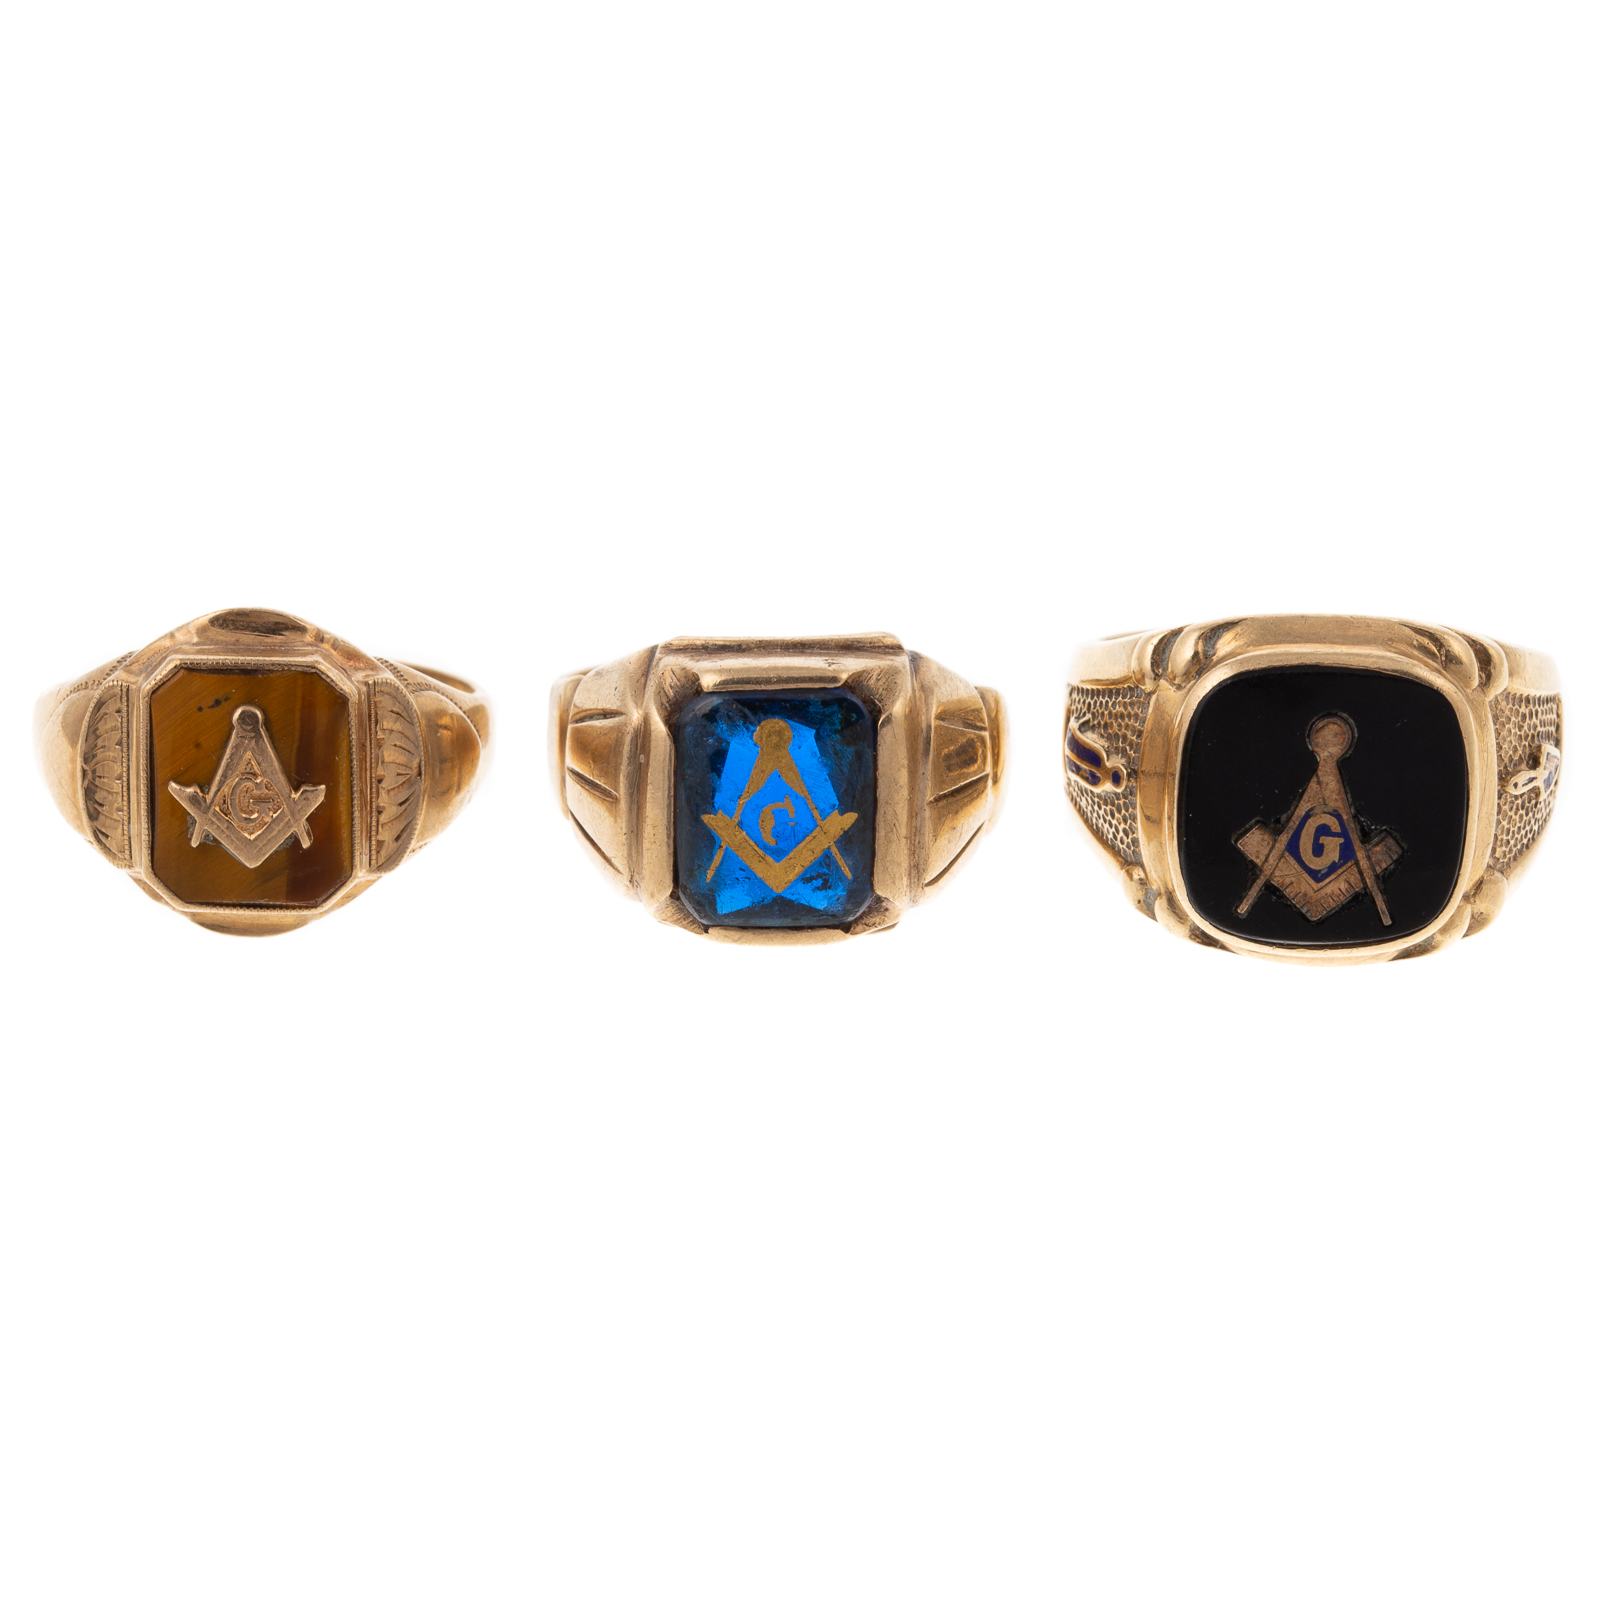 A TRIO OF MASONIC RINGS IN 10K 29dffe